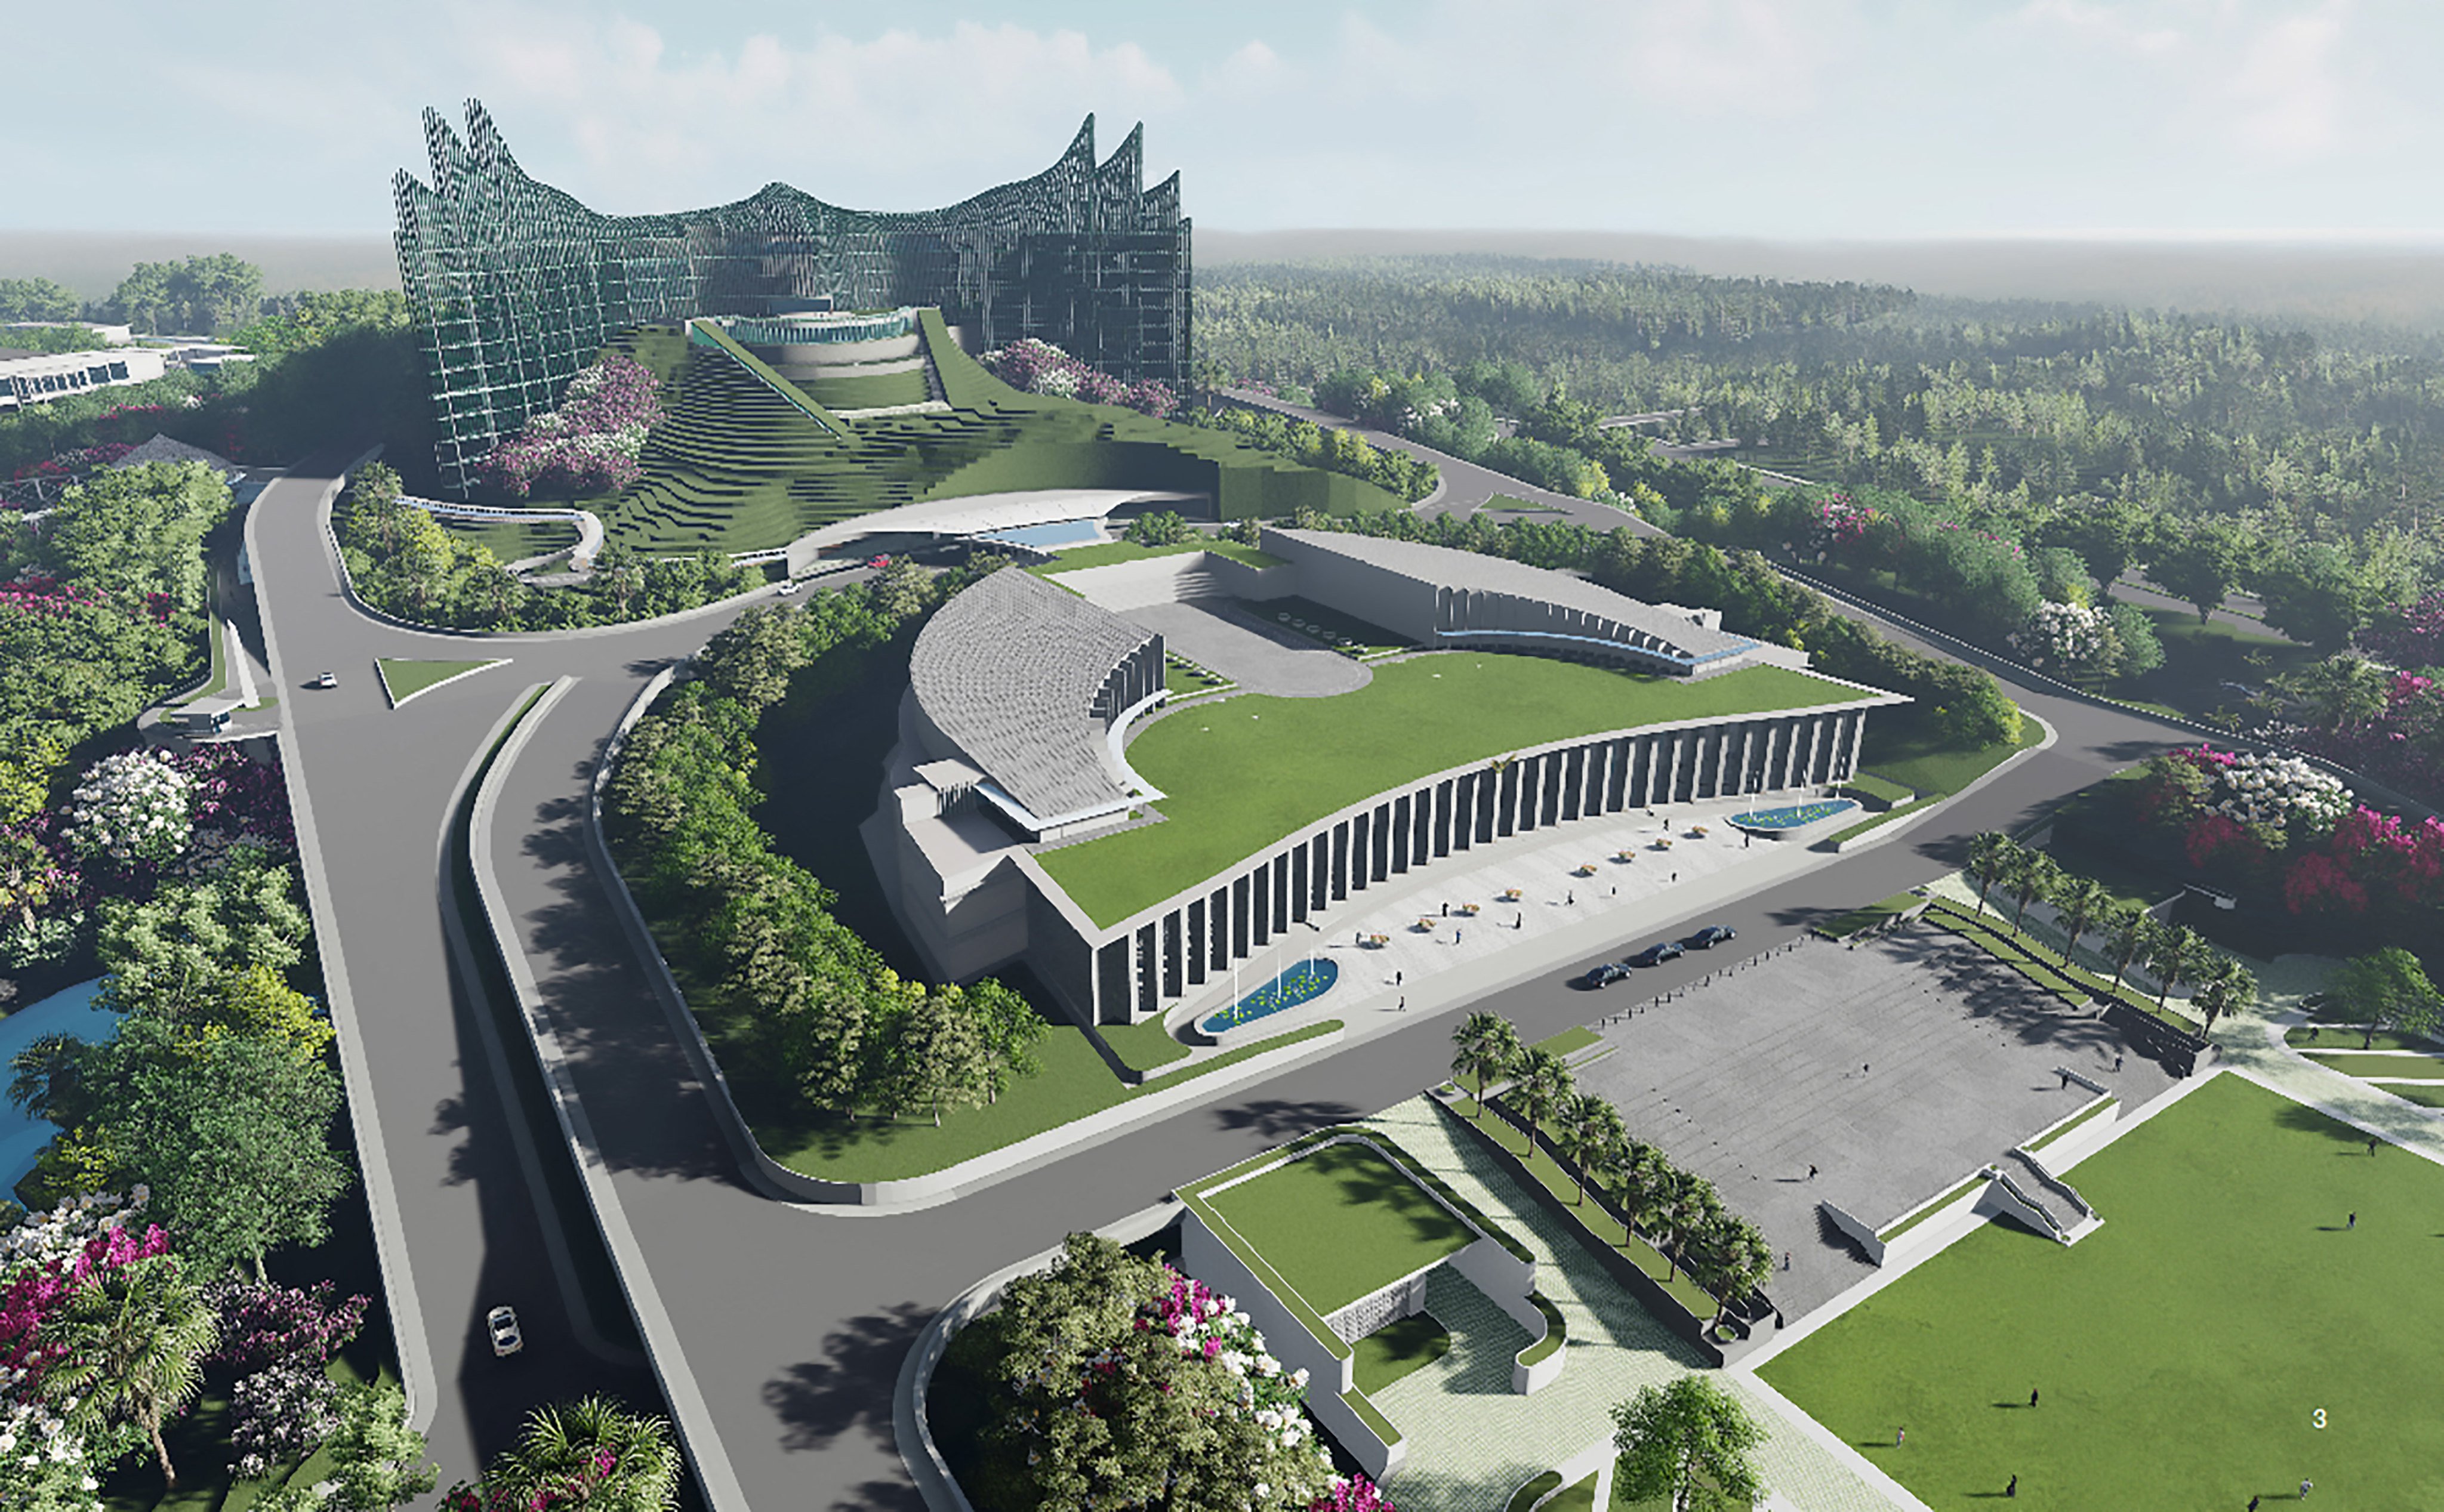 An artist’s impression of Indonesia’s future presidential palace in Nusantara, the country’s new capital city under construction in East Kalimantan, Borneo. The name Nusantara has a long history in Southeast Asia. Image: AFP